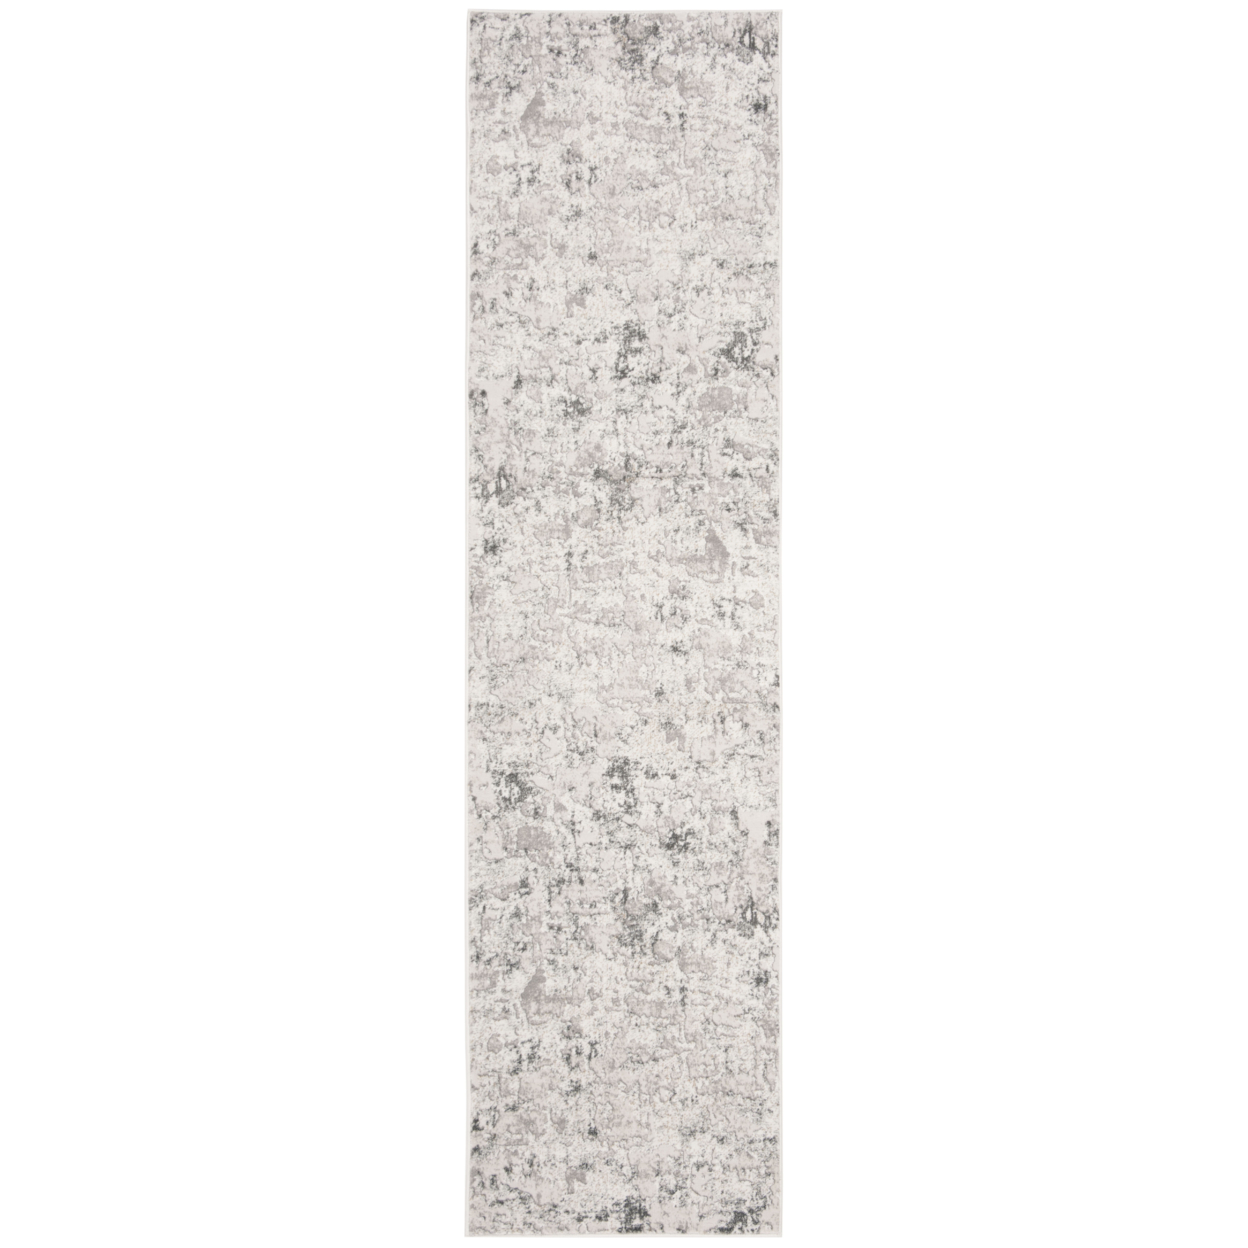 SAFAVIEH Vogue Collection VGE144A Beige / Charcoal Rug - 2' X 14'